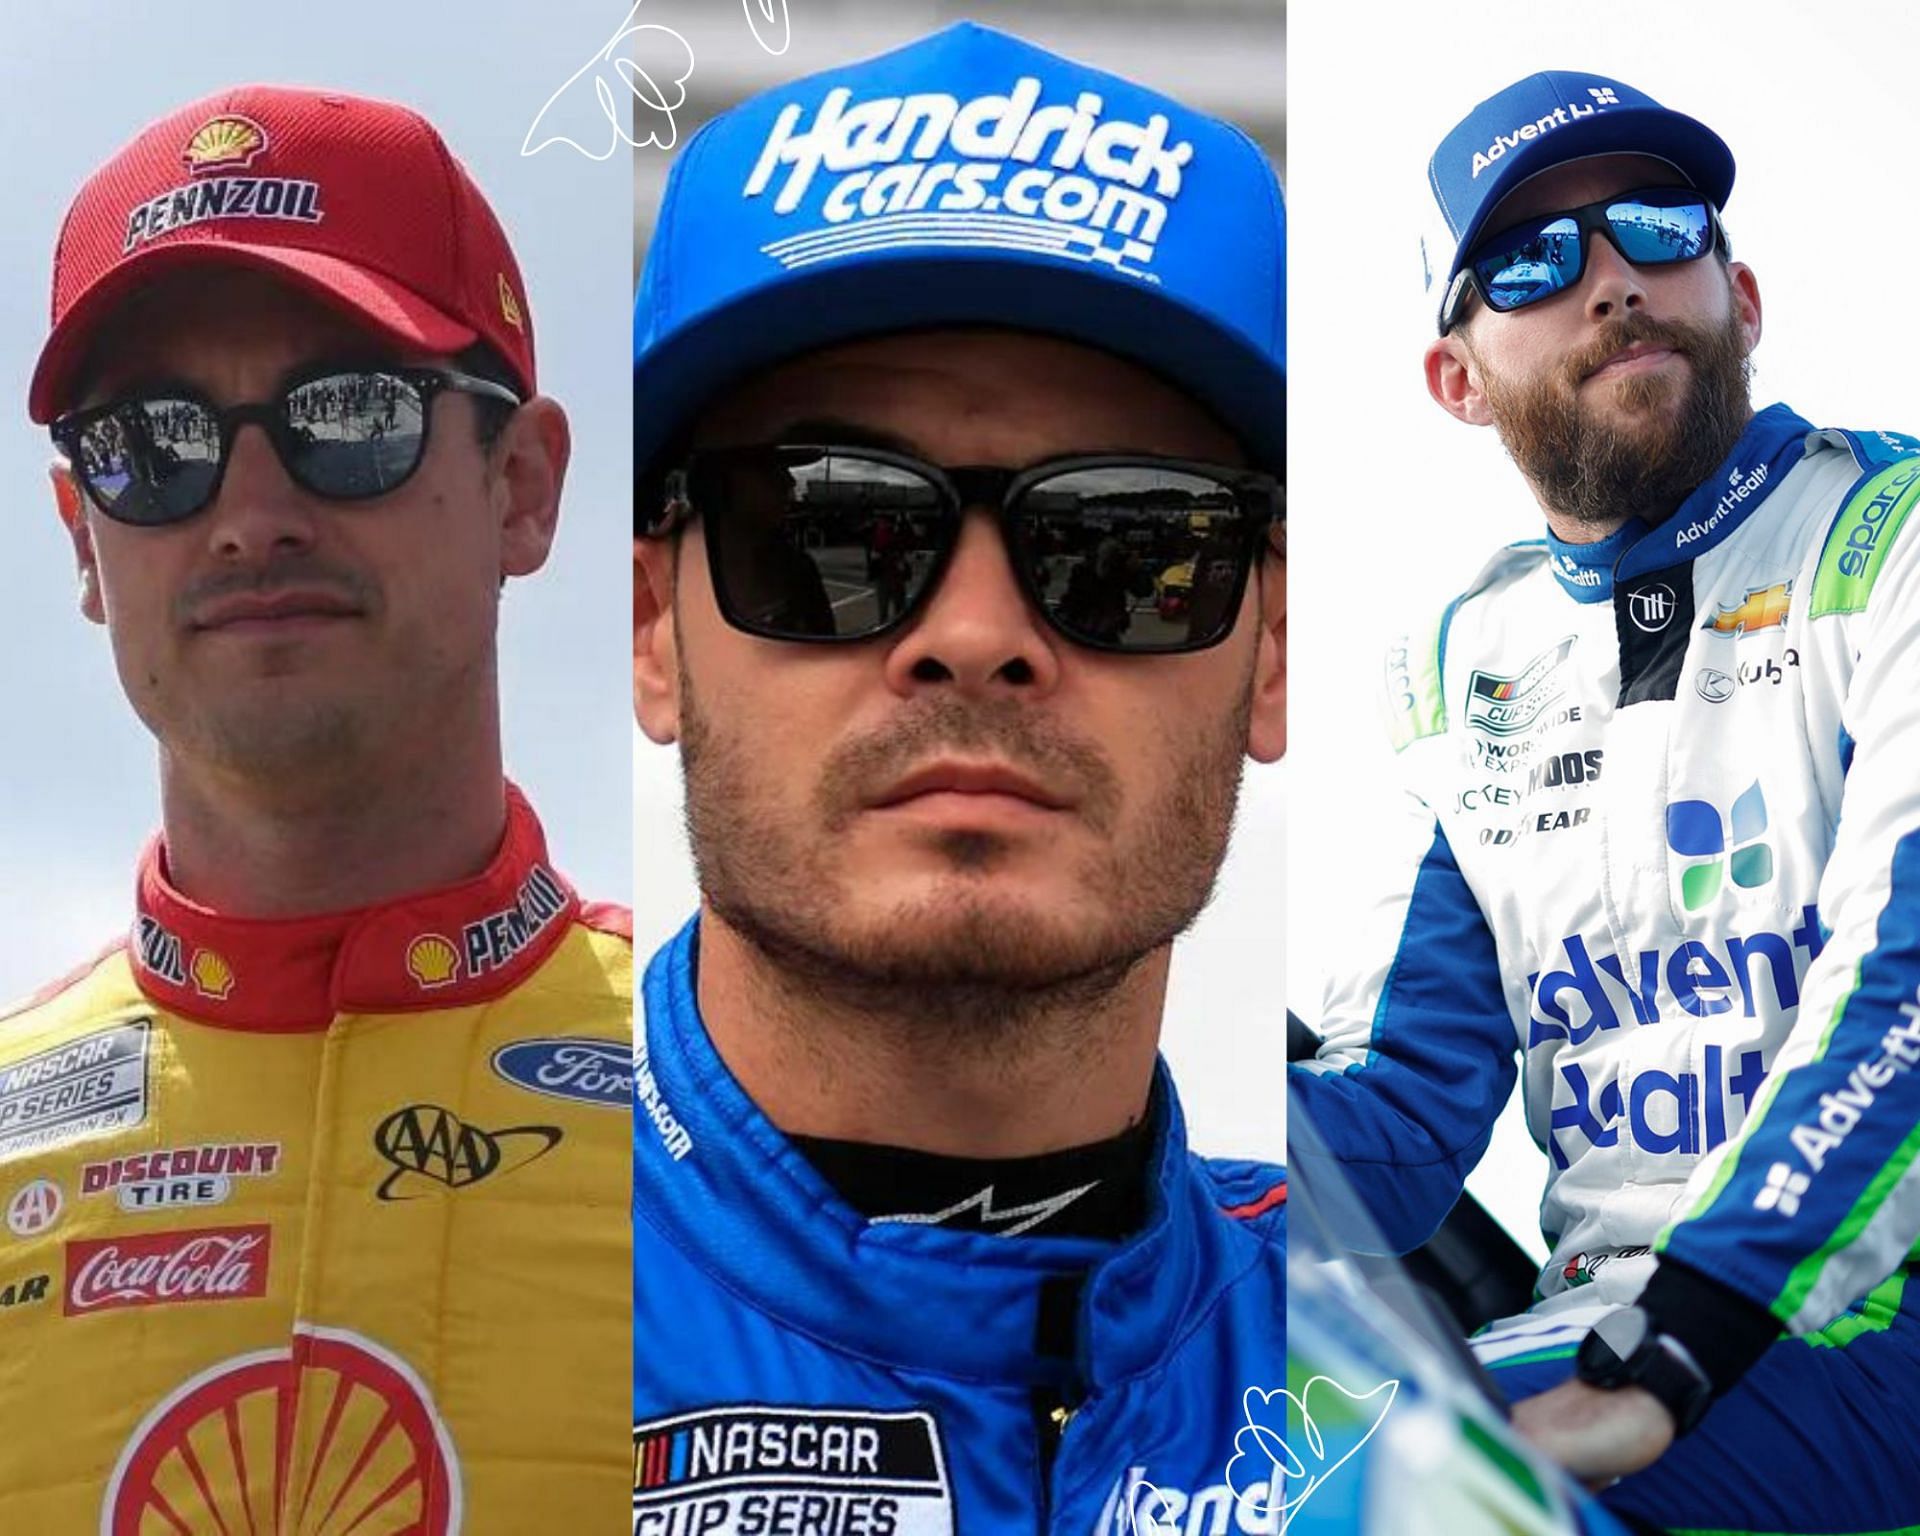 (L-R) NASCAR Cup Series drivers Joey Logano, Kyle Larson and Ross Chastain